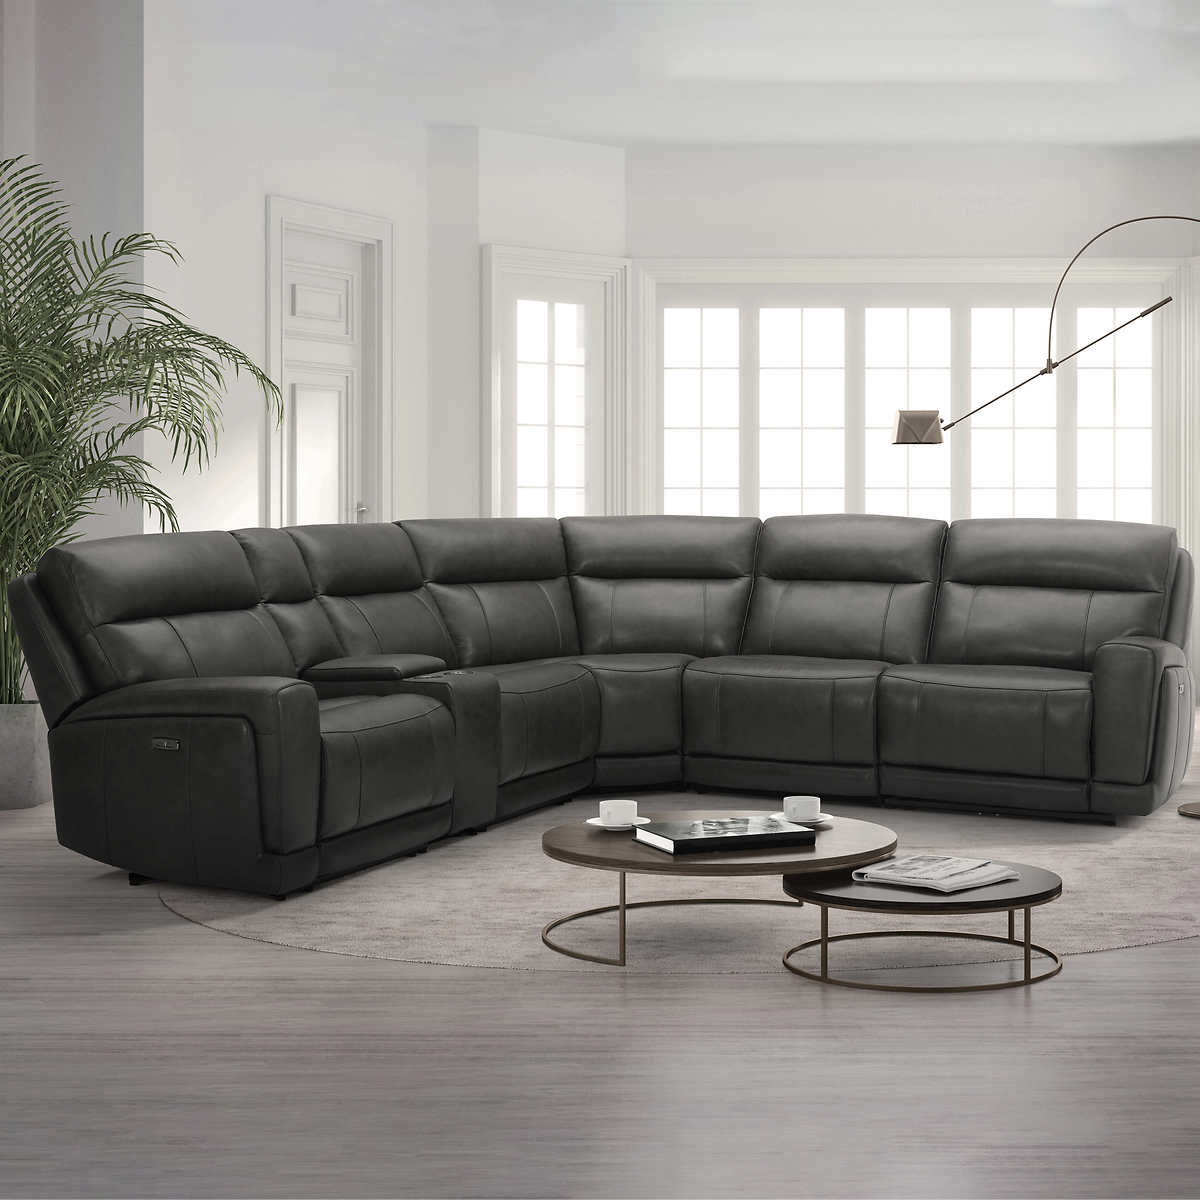 Leather Power Reclining Sectional, Corry 6 Piece Leather Power Reclining Sectional Sofa Brown